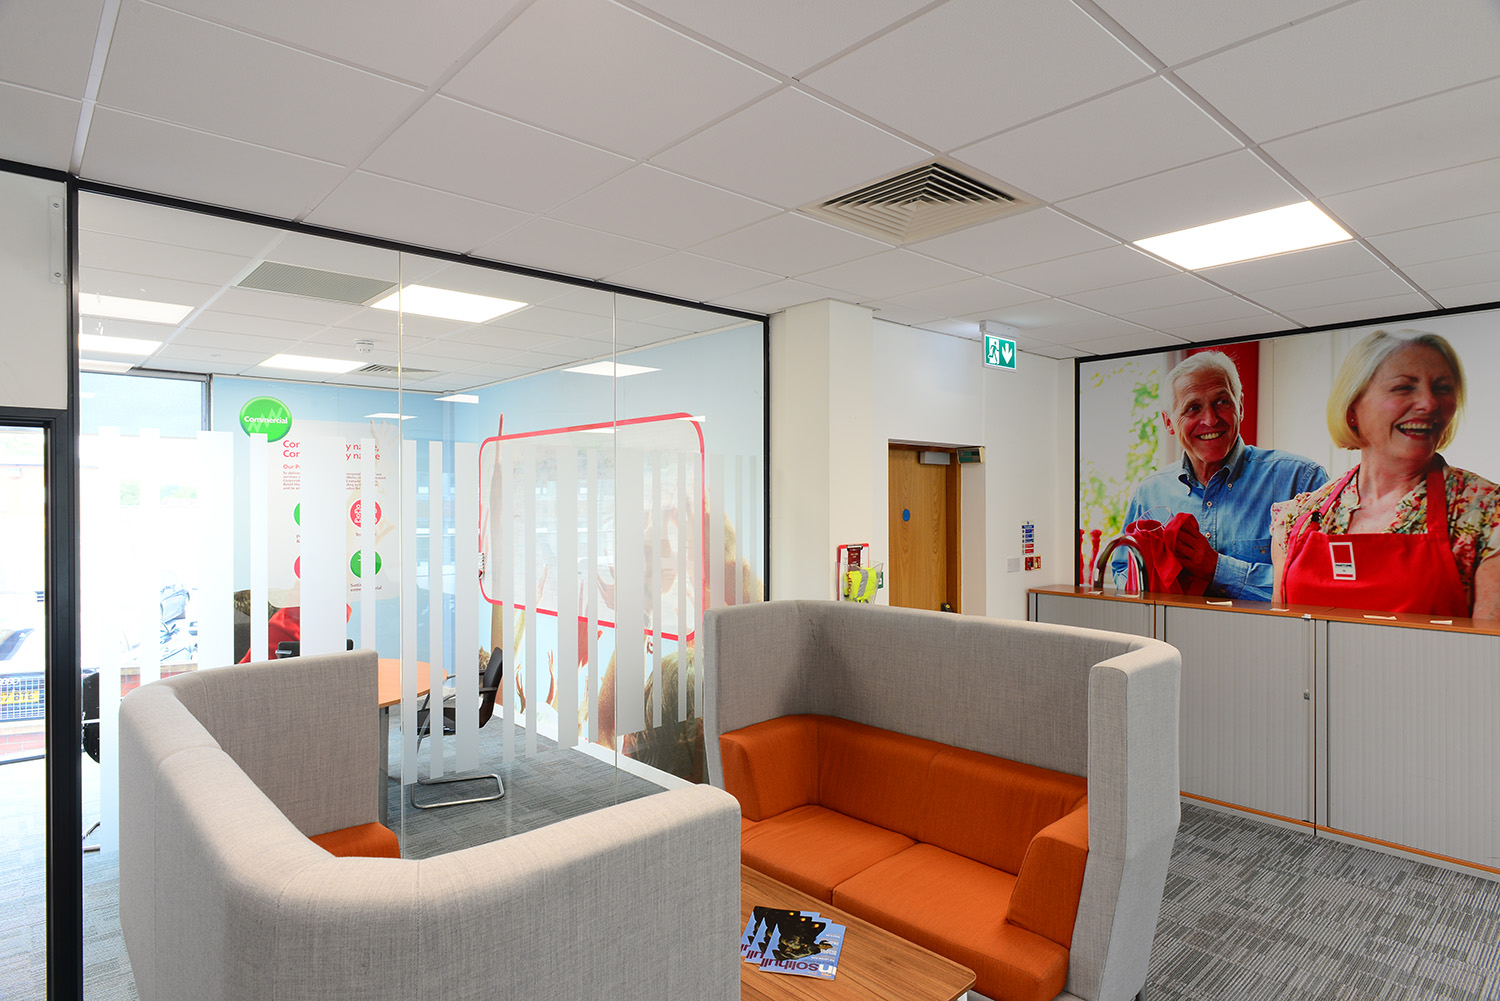 Ultra-green Armstrong ceilings help npower with sustainability